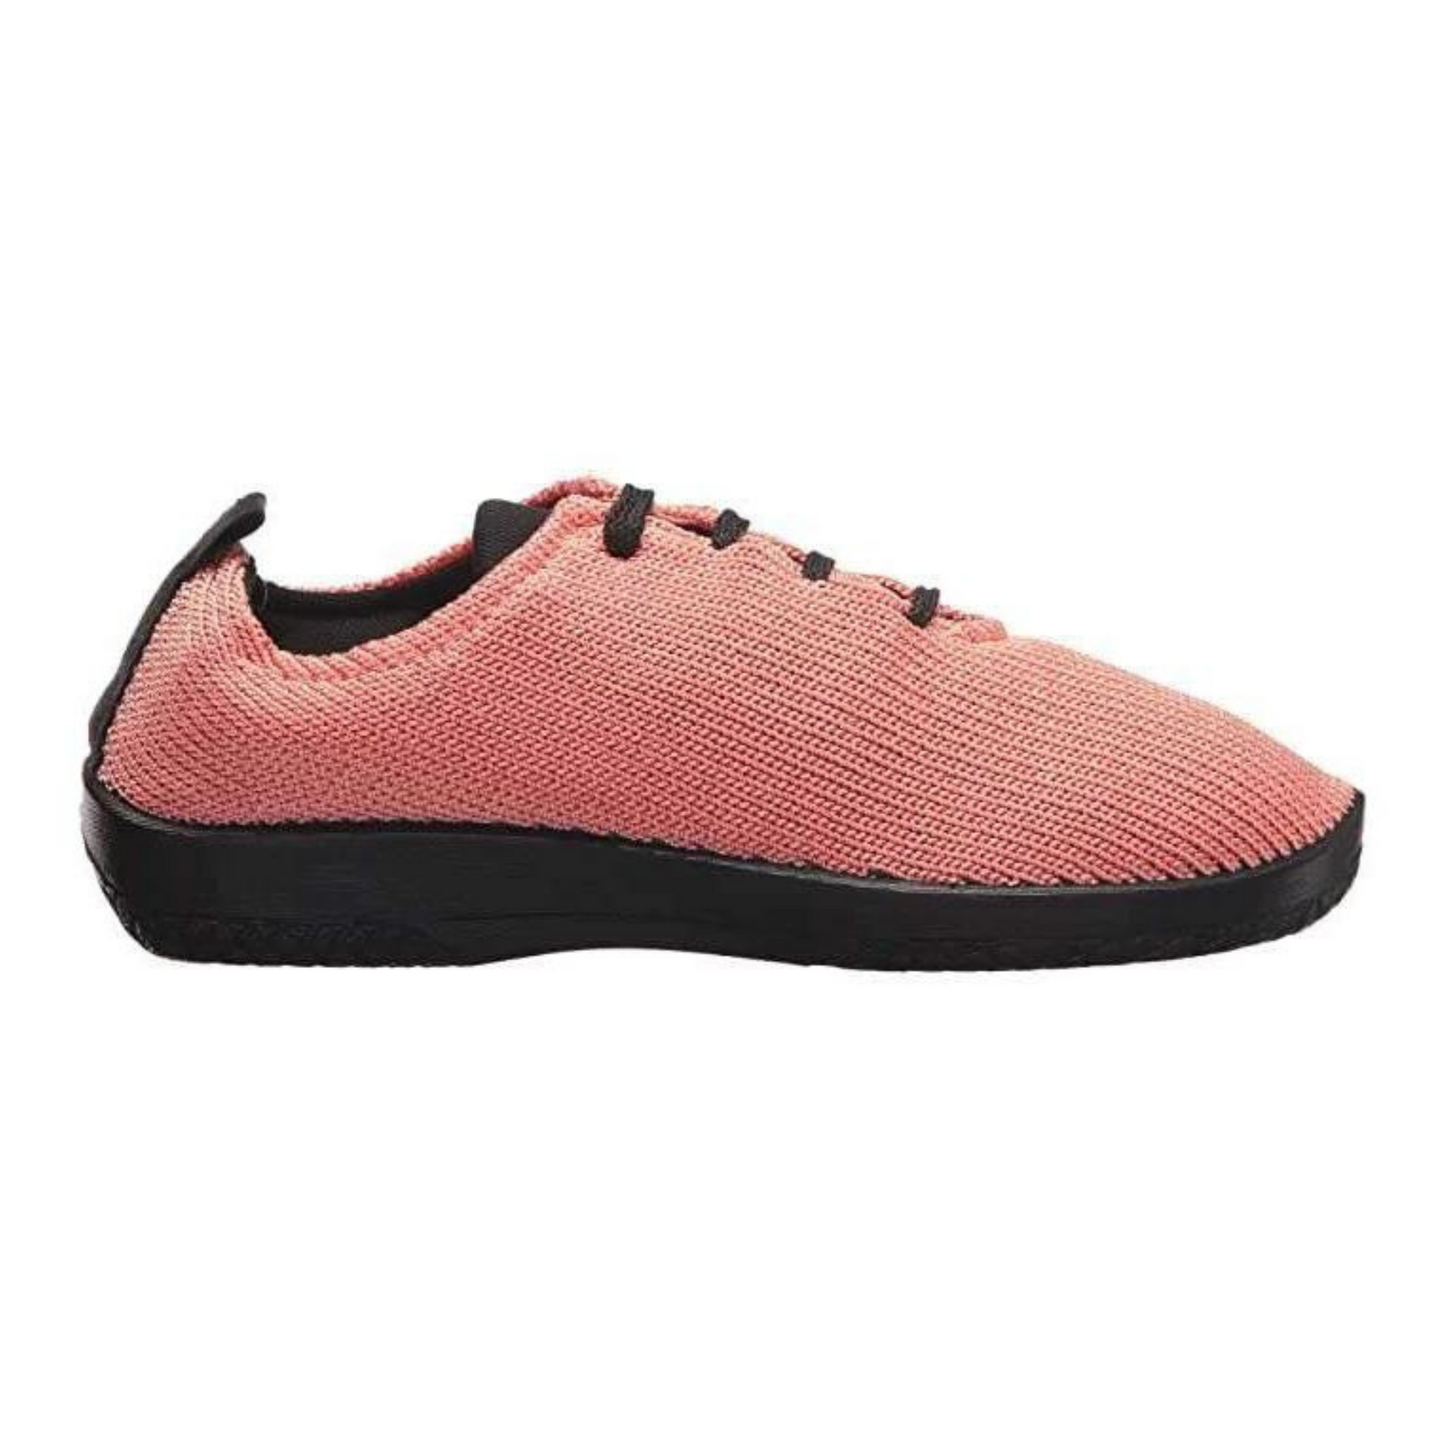 A right side view of a salmon-coloured knit shoe with black laces.